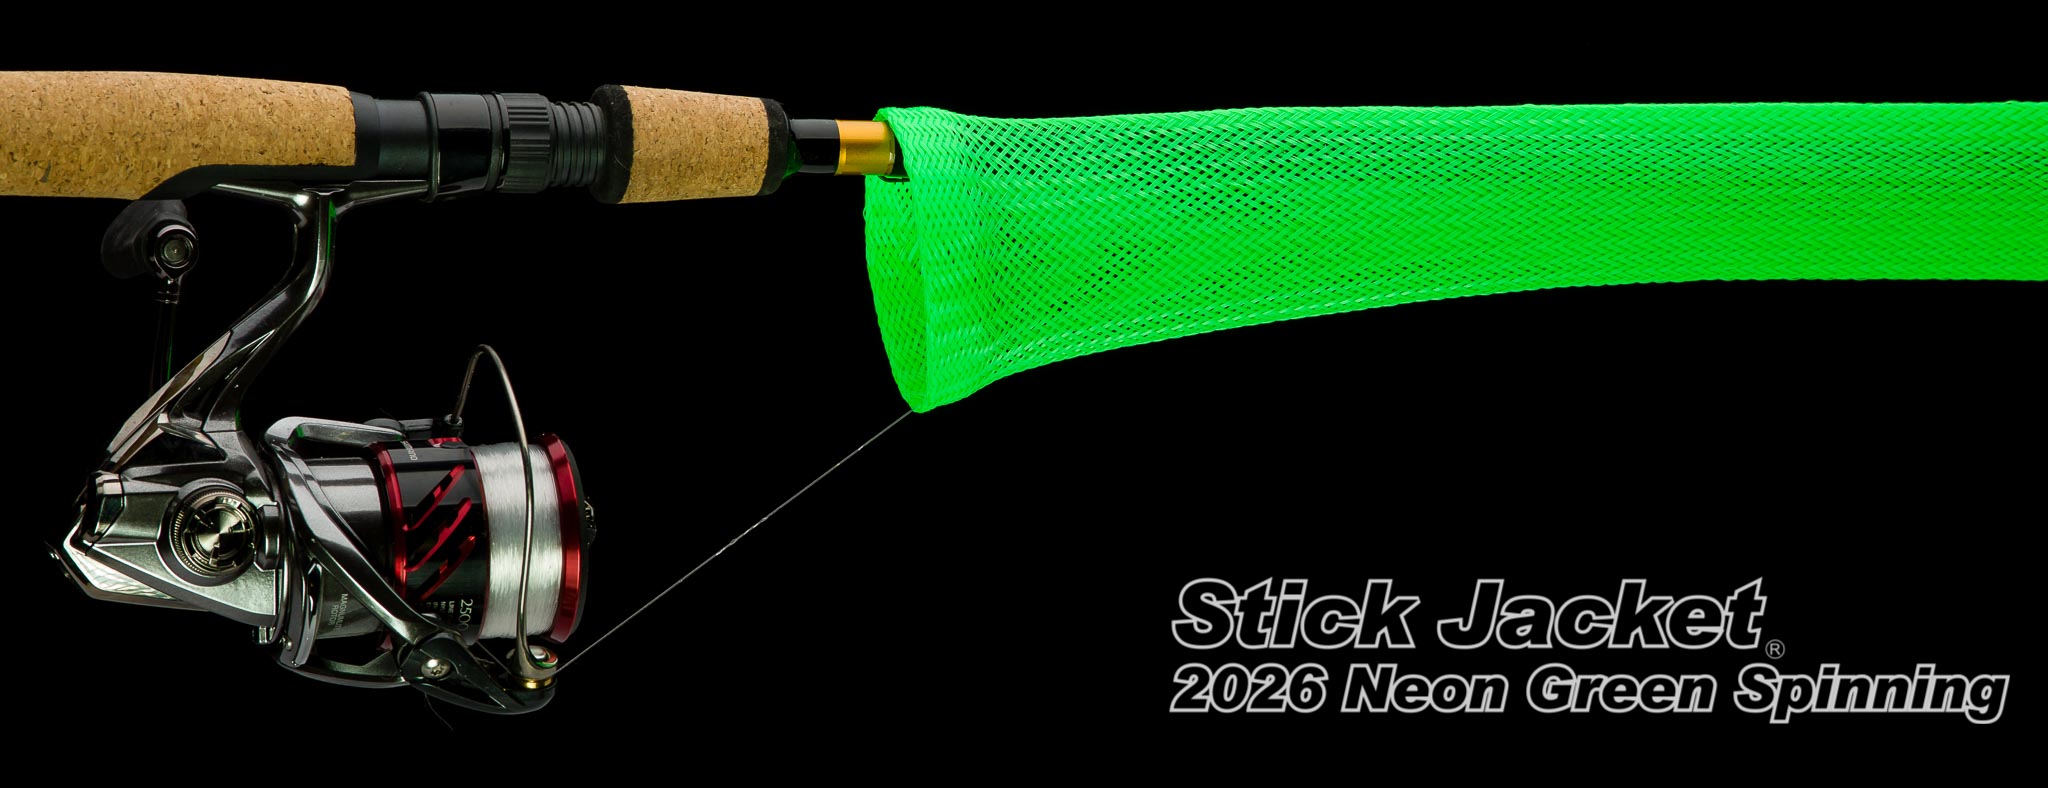 2026-Spinning-Neon-Green-Stick-Jacket-Fishing-Rod-Cover